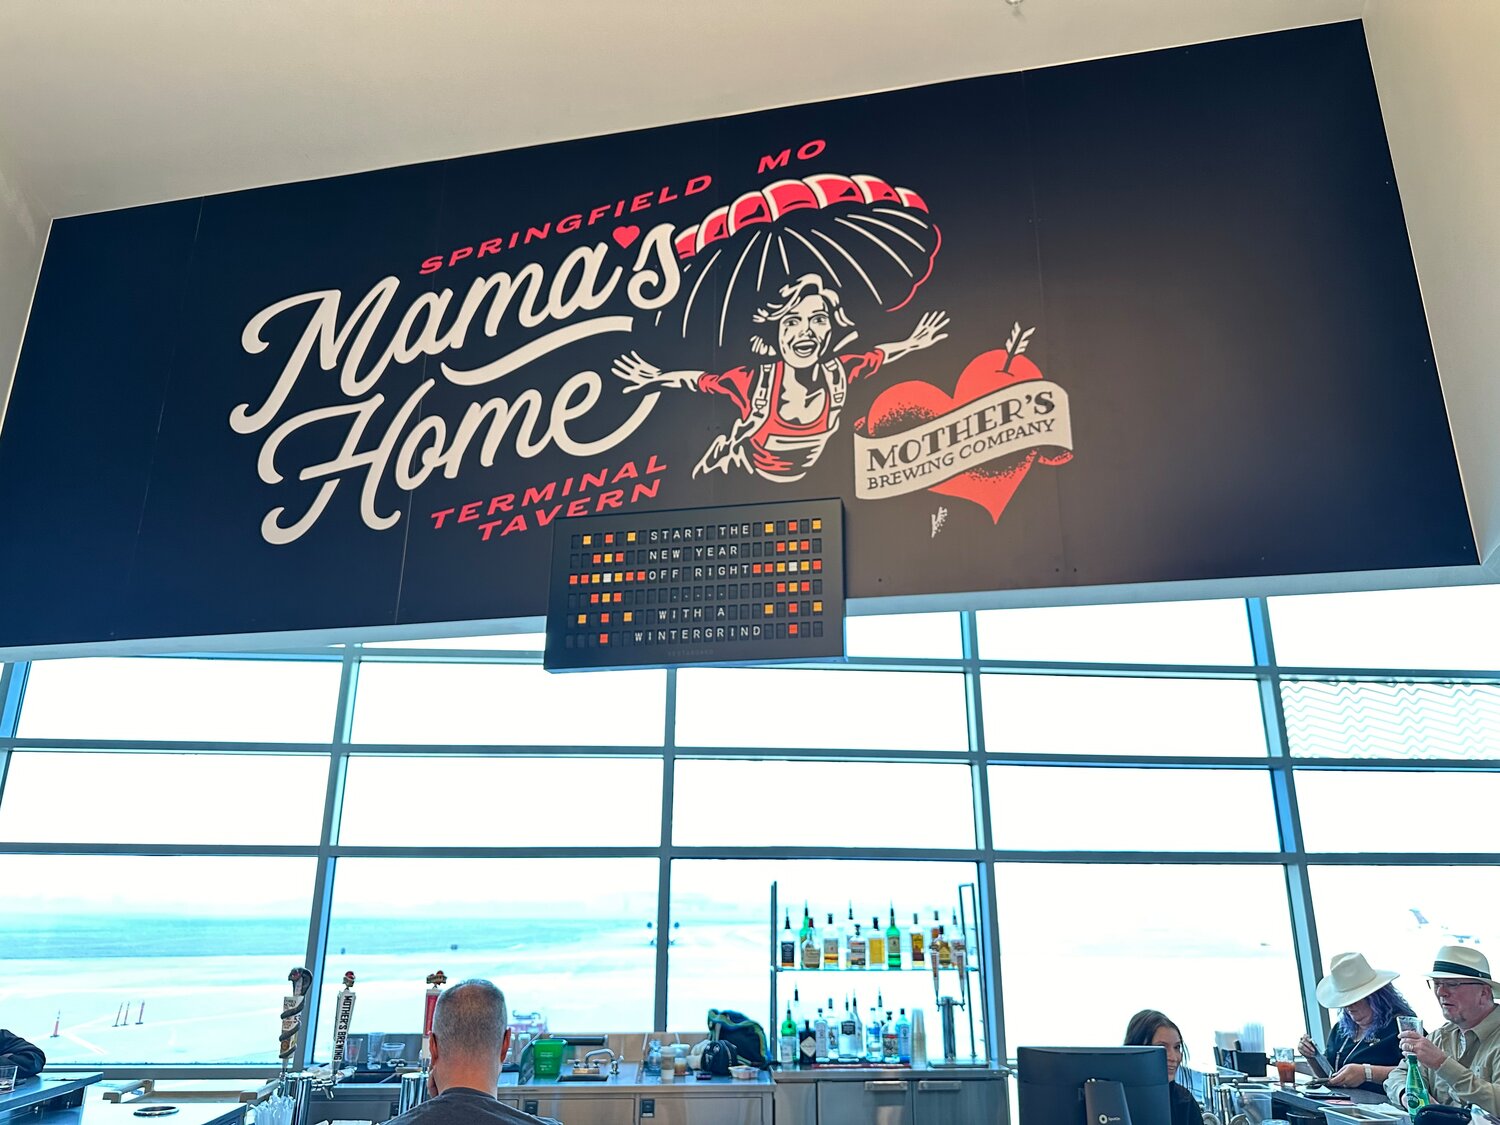 Mama’s Home Terminal Tavern by Mother's Brewing Co.